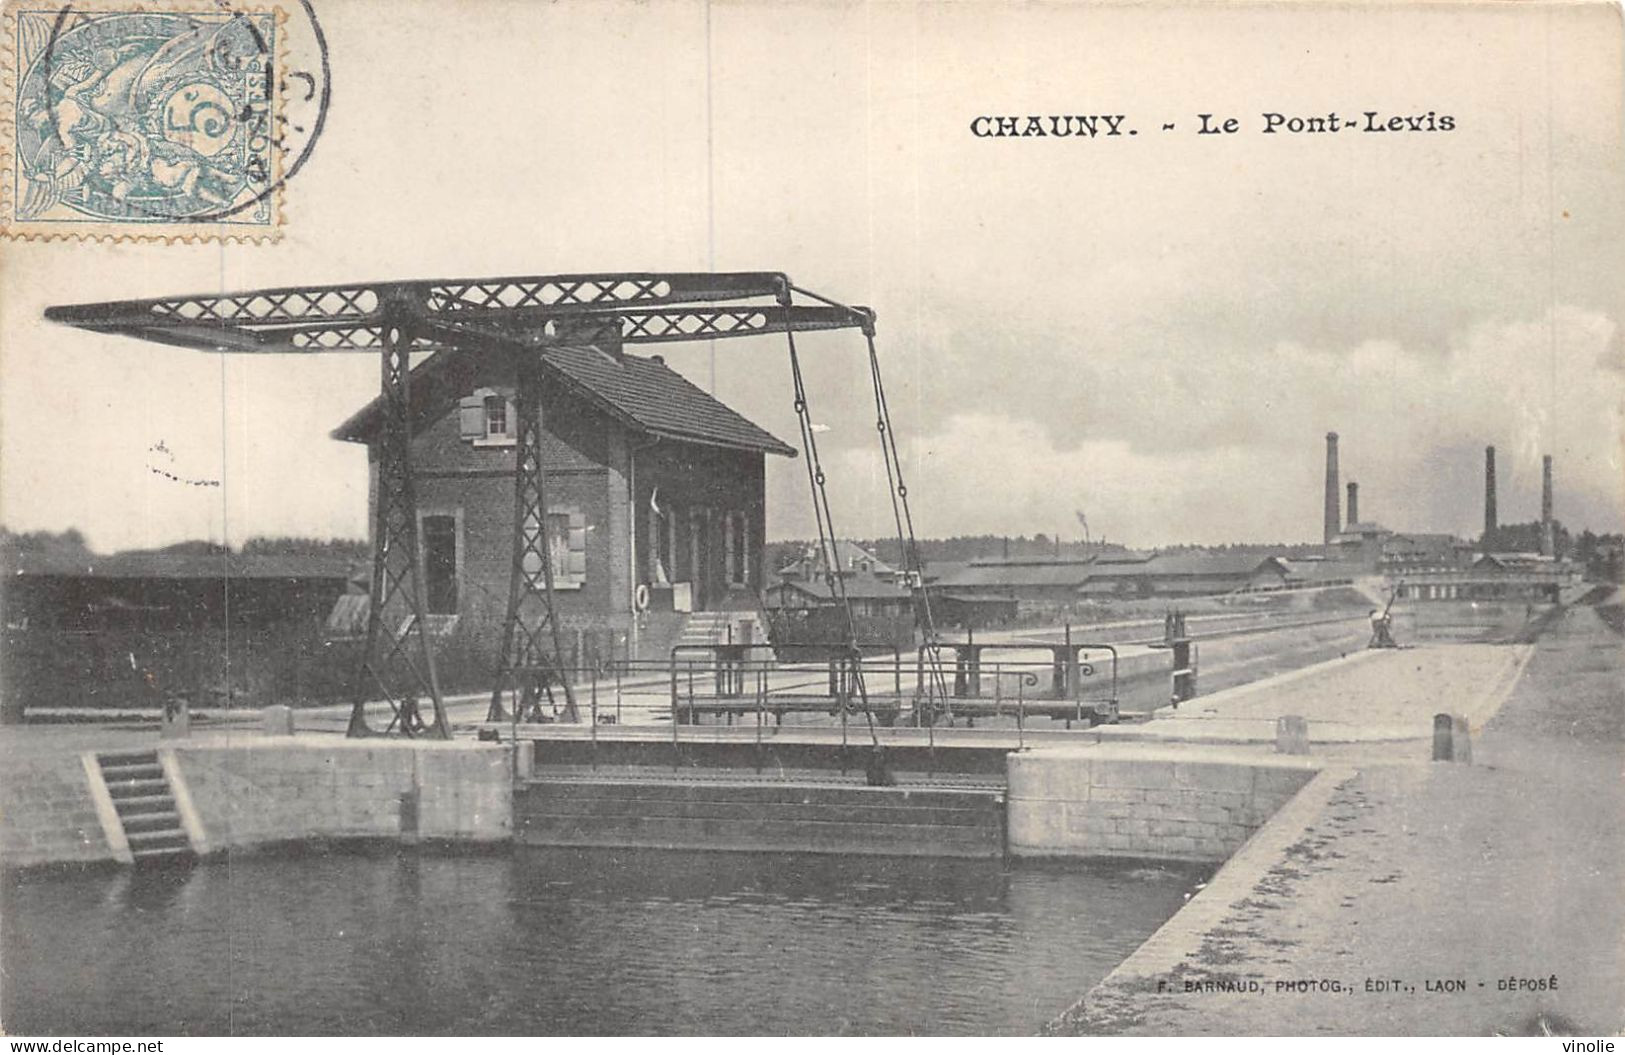 P-24-Mi-Is-755 : CHAUNY. LE PONT-LEVIS. CANAL - Chauny